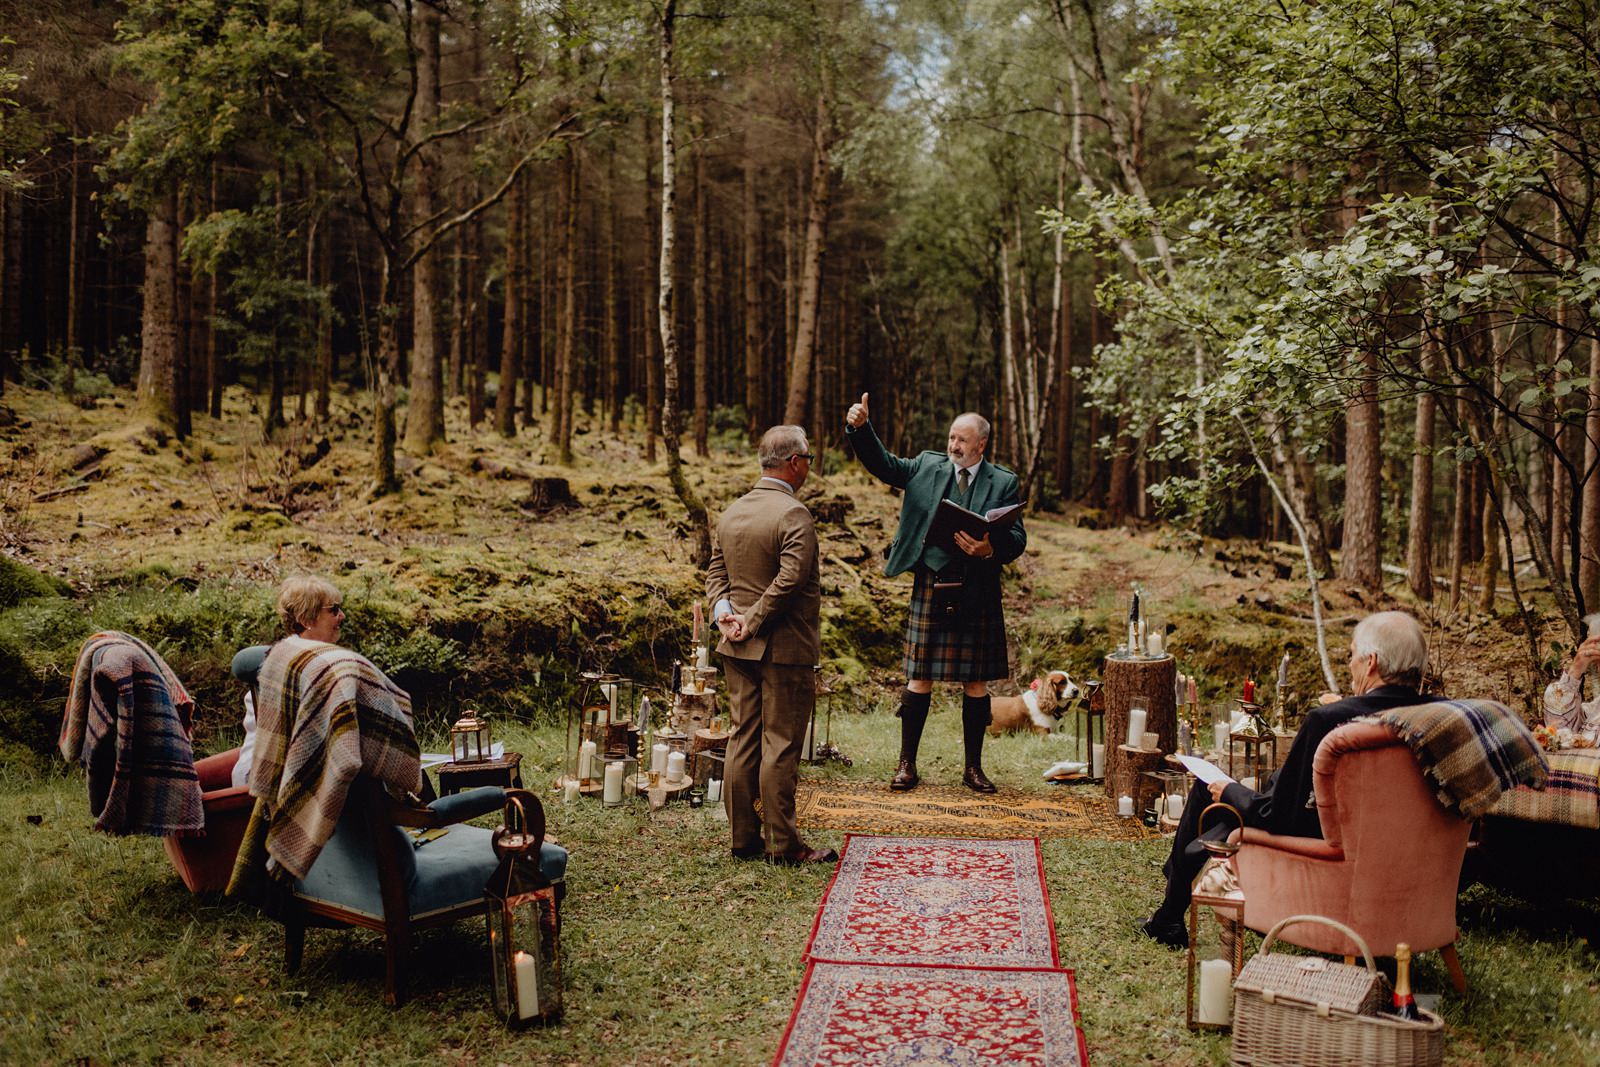 Glencoe elopement Scotland outdoor humanist ceremony with rugs and chairs styling by we are gloam rustic quirky romantic wedding setup